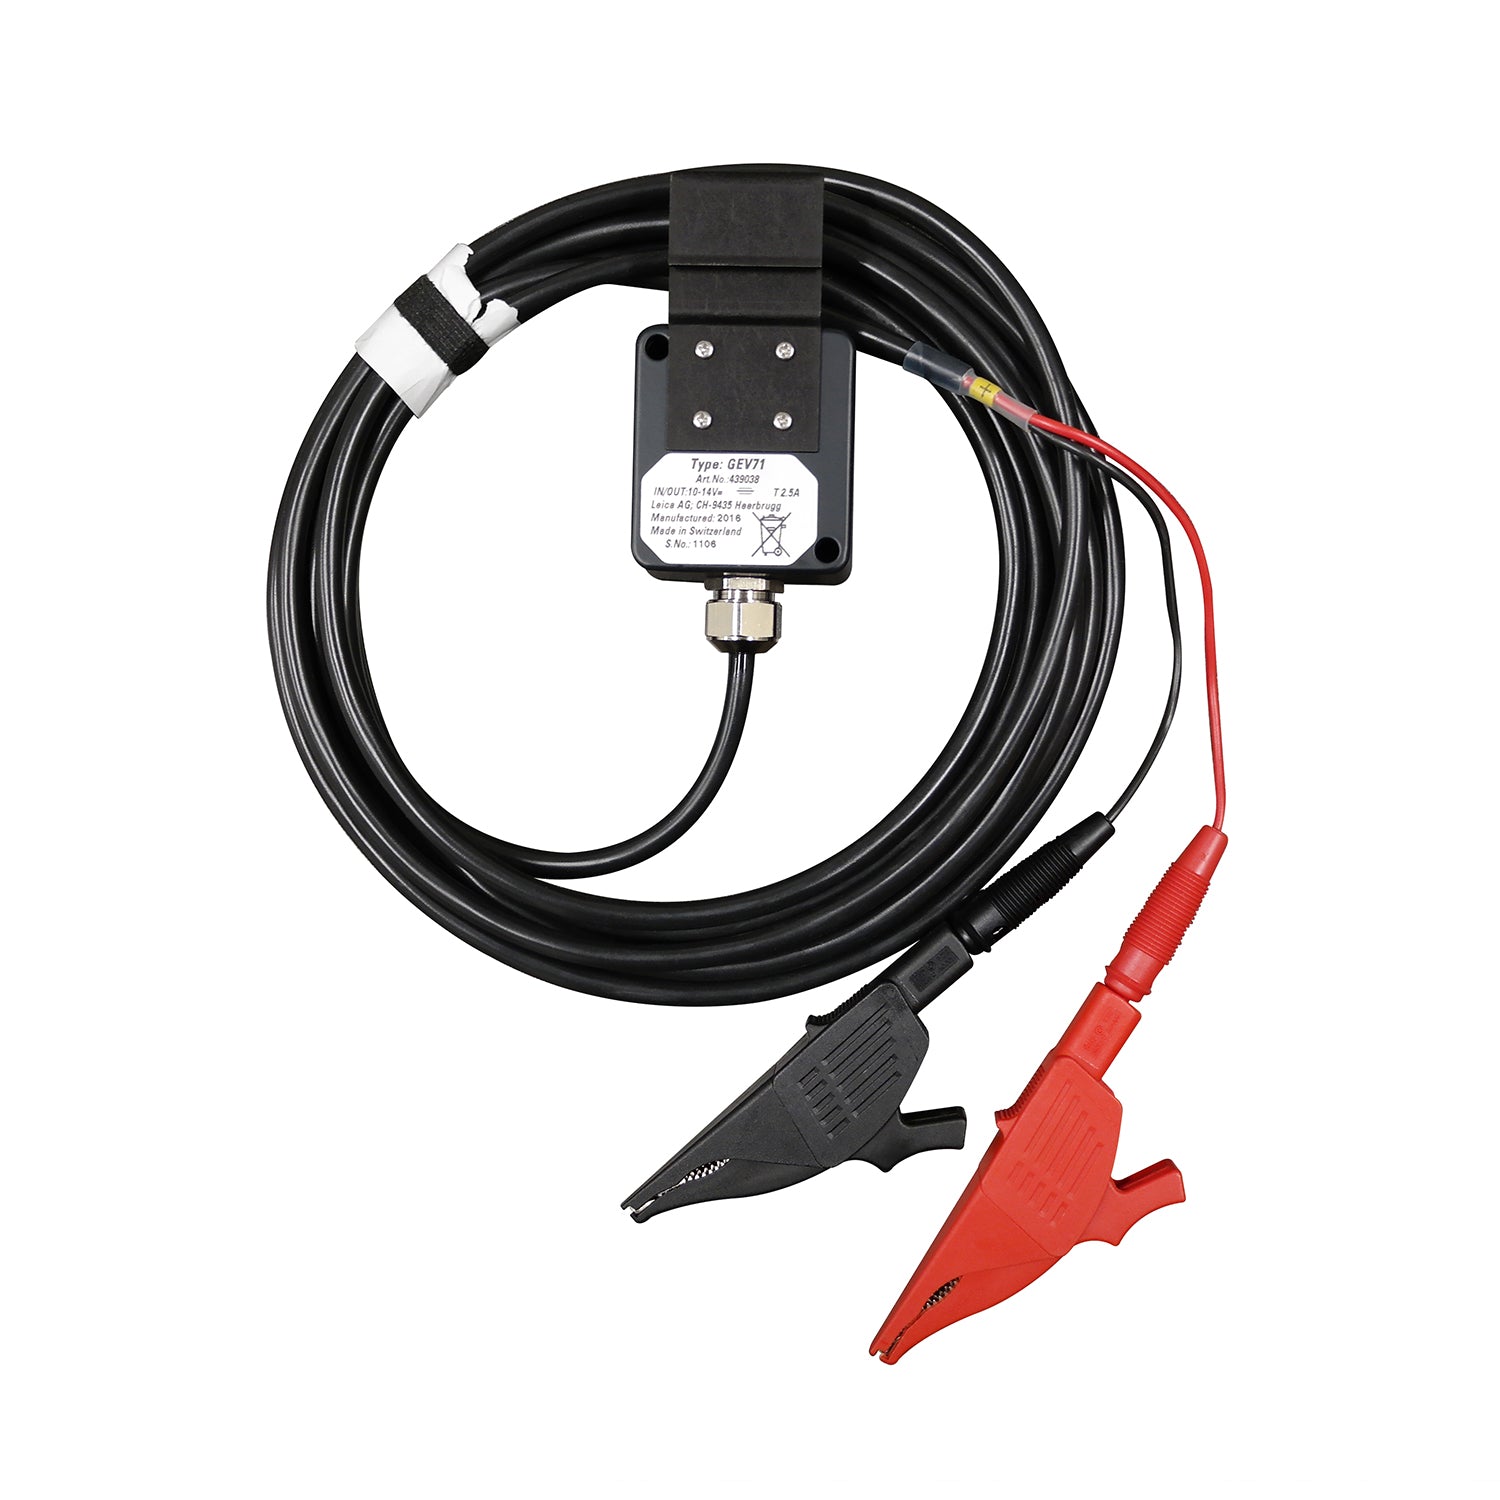 GeoMax GEV71 Car Battery Power Cable - eGPS Solutions Inc.